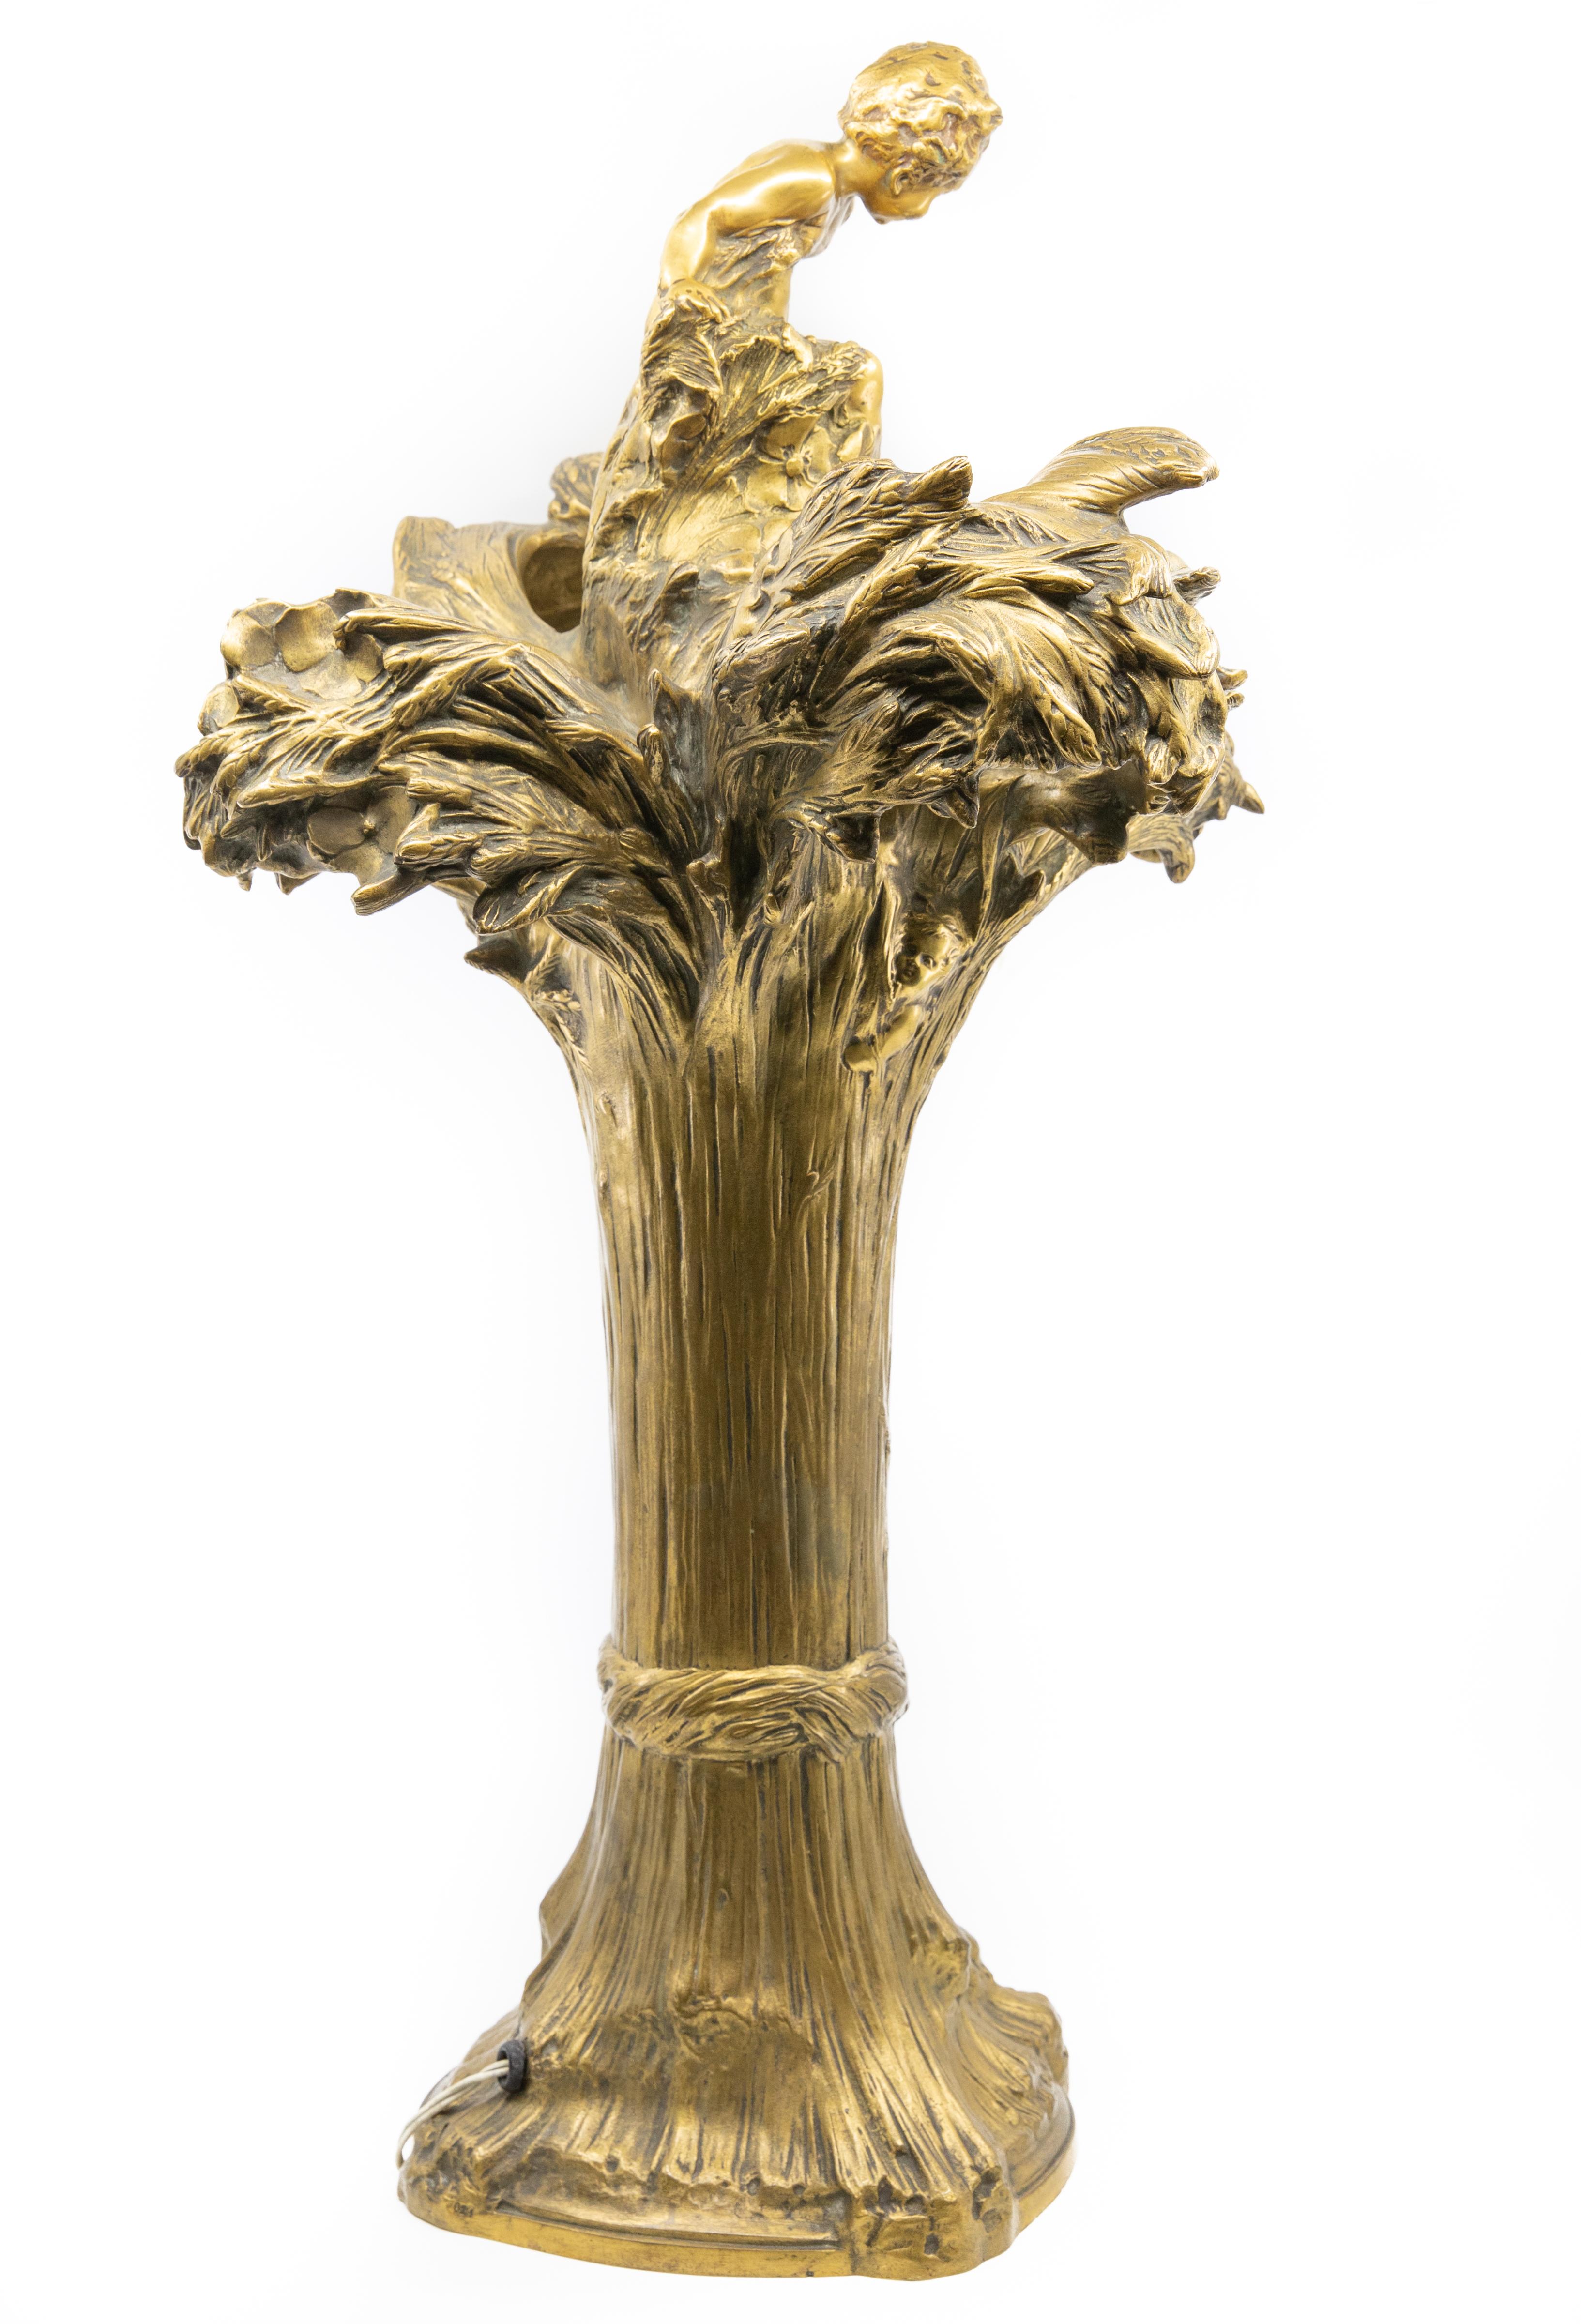 François-Raoul Larche bronze lamp, France, early to mid-20th century, depicting putti frolicking in wheat stalks, 